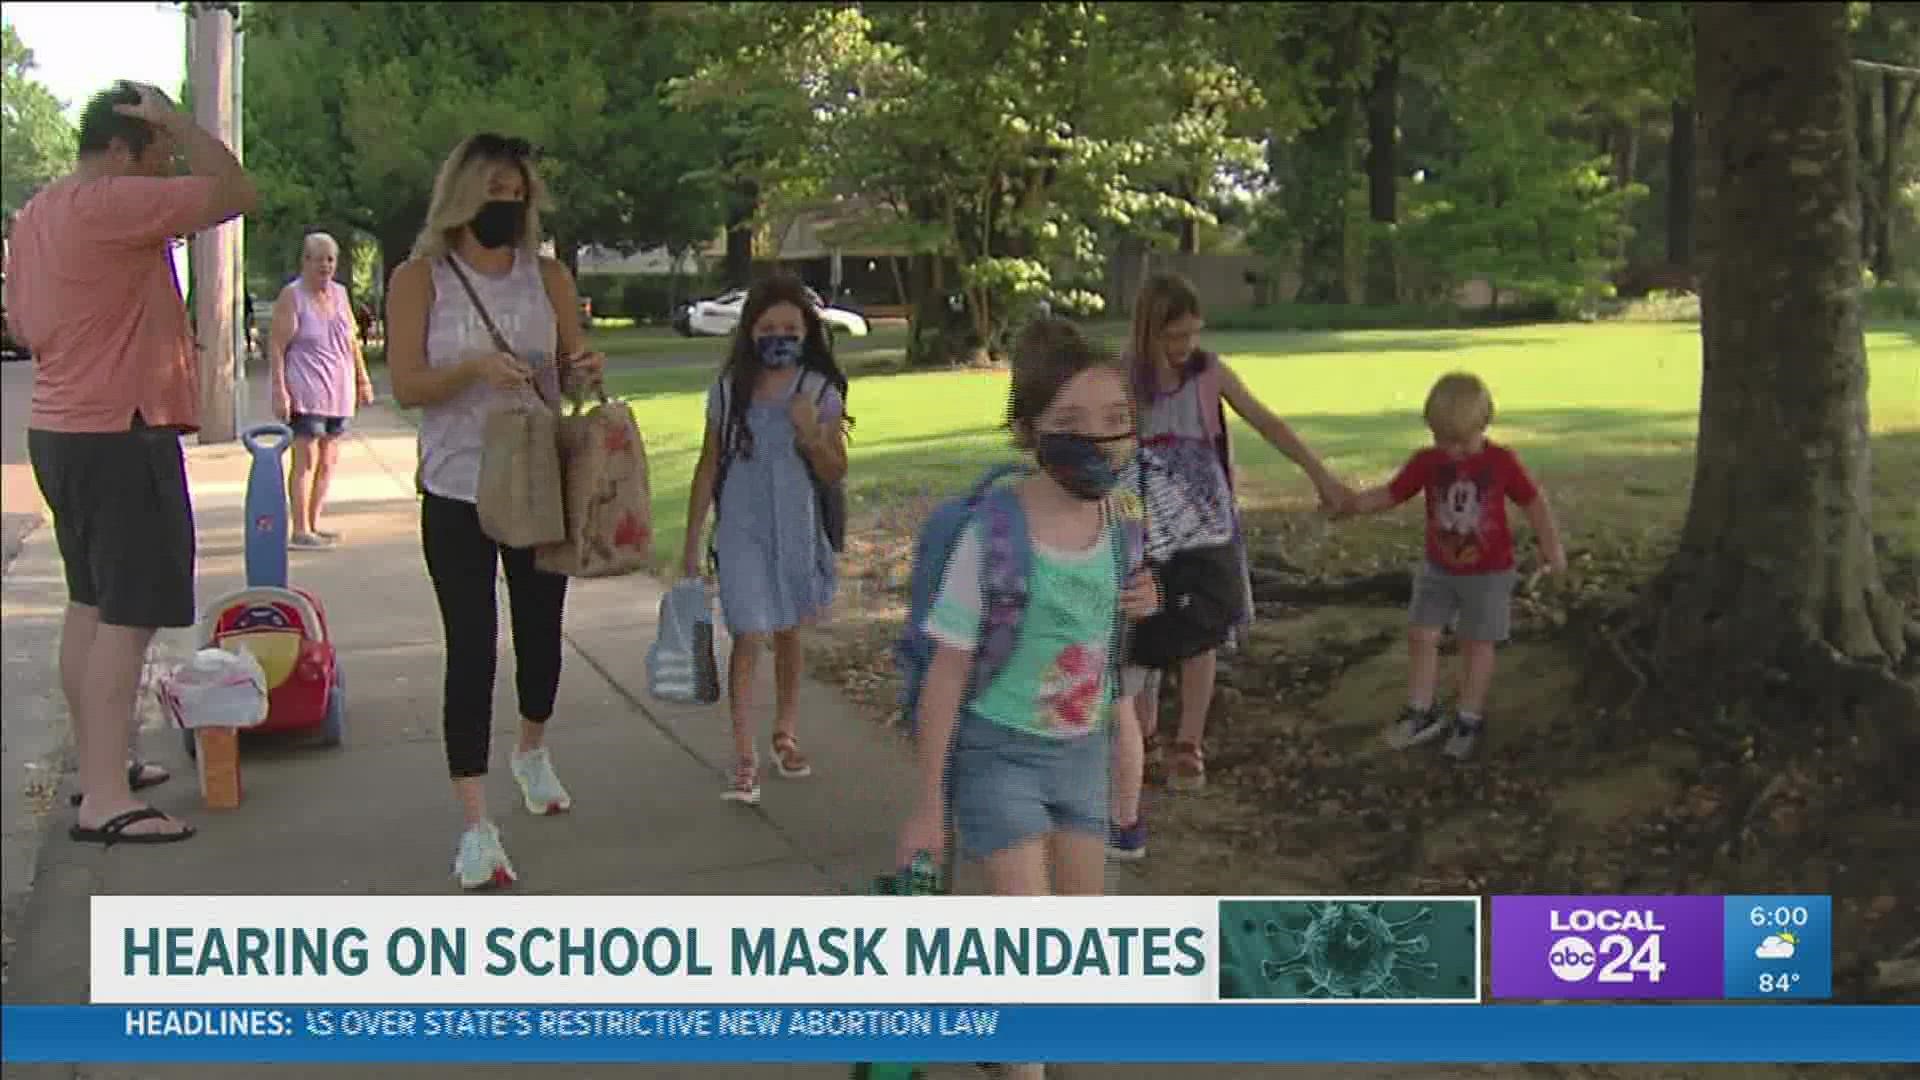 Judge Sheryl Lipman will issue a written decision, but until then, students in Shelby County will continue to wear masks with no opt out option.